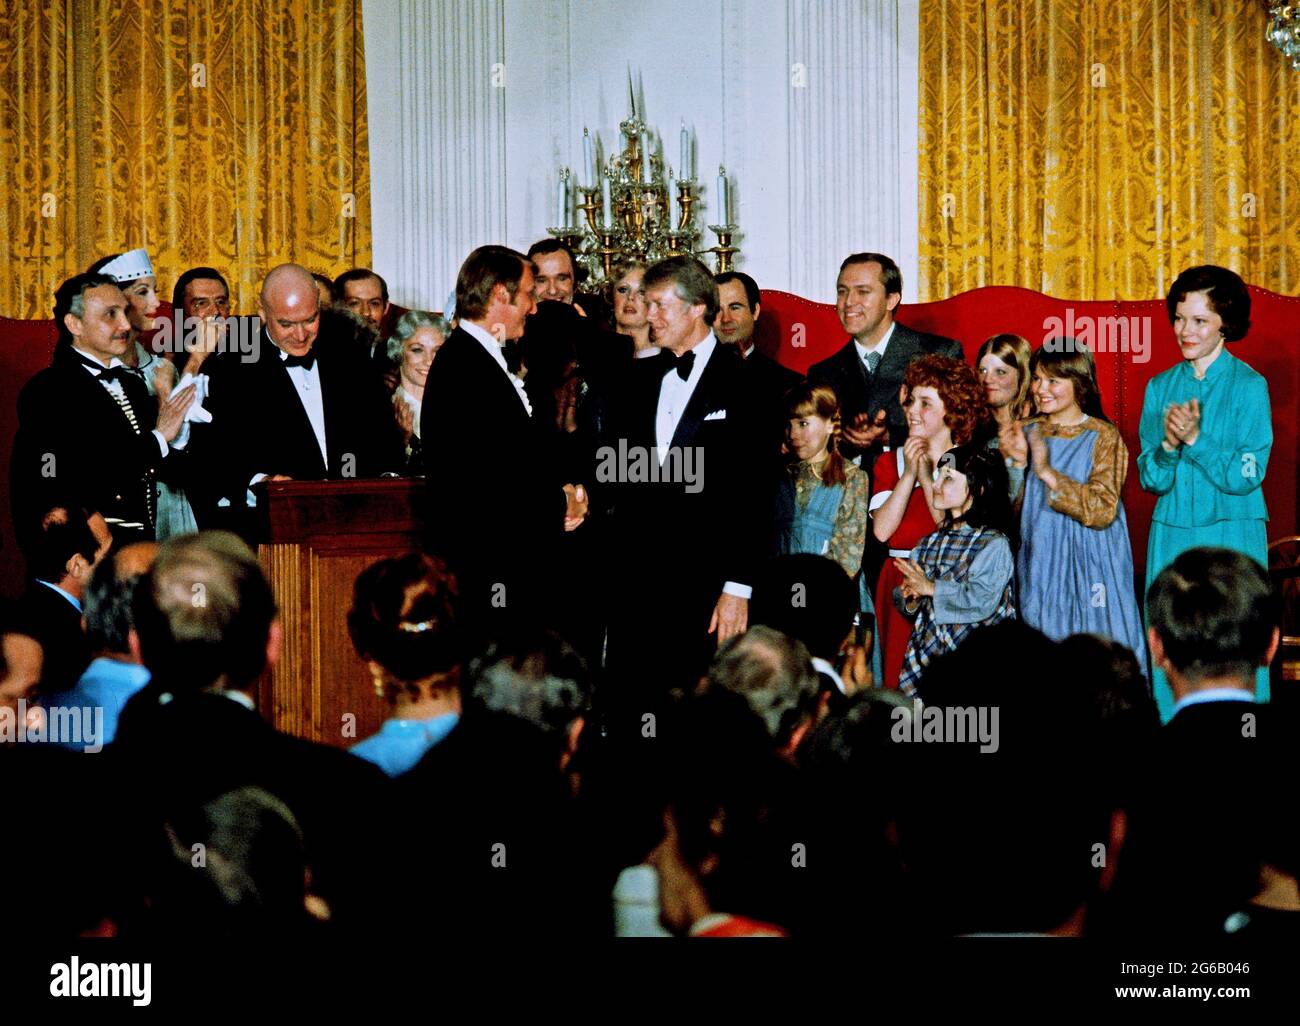 United States President Jimmy Carter shakes hands with director Mike Nichols as he and first lady Rosalynn Carter, right, pose with the cast of “Annie” as they host a dinner in honor of the State Governors and their spouses in the East Room of the White House in Washington, DC on Tuesday, March 1, 1977. (Photo by Arnie Sachs/CNP/Sipa USA) Credit: Sipa USA/Alamy Live News Stock Photo